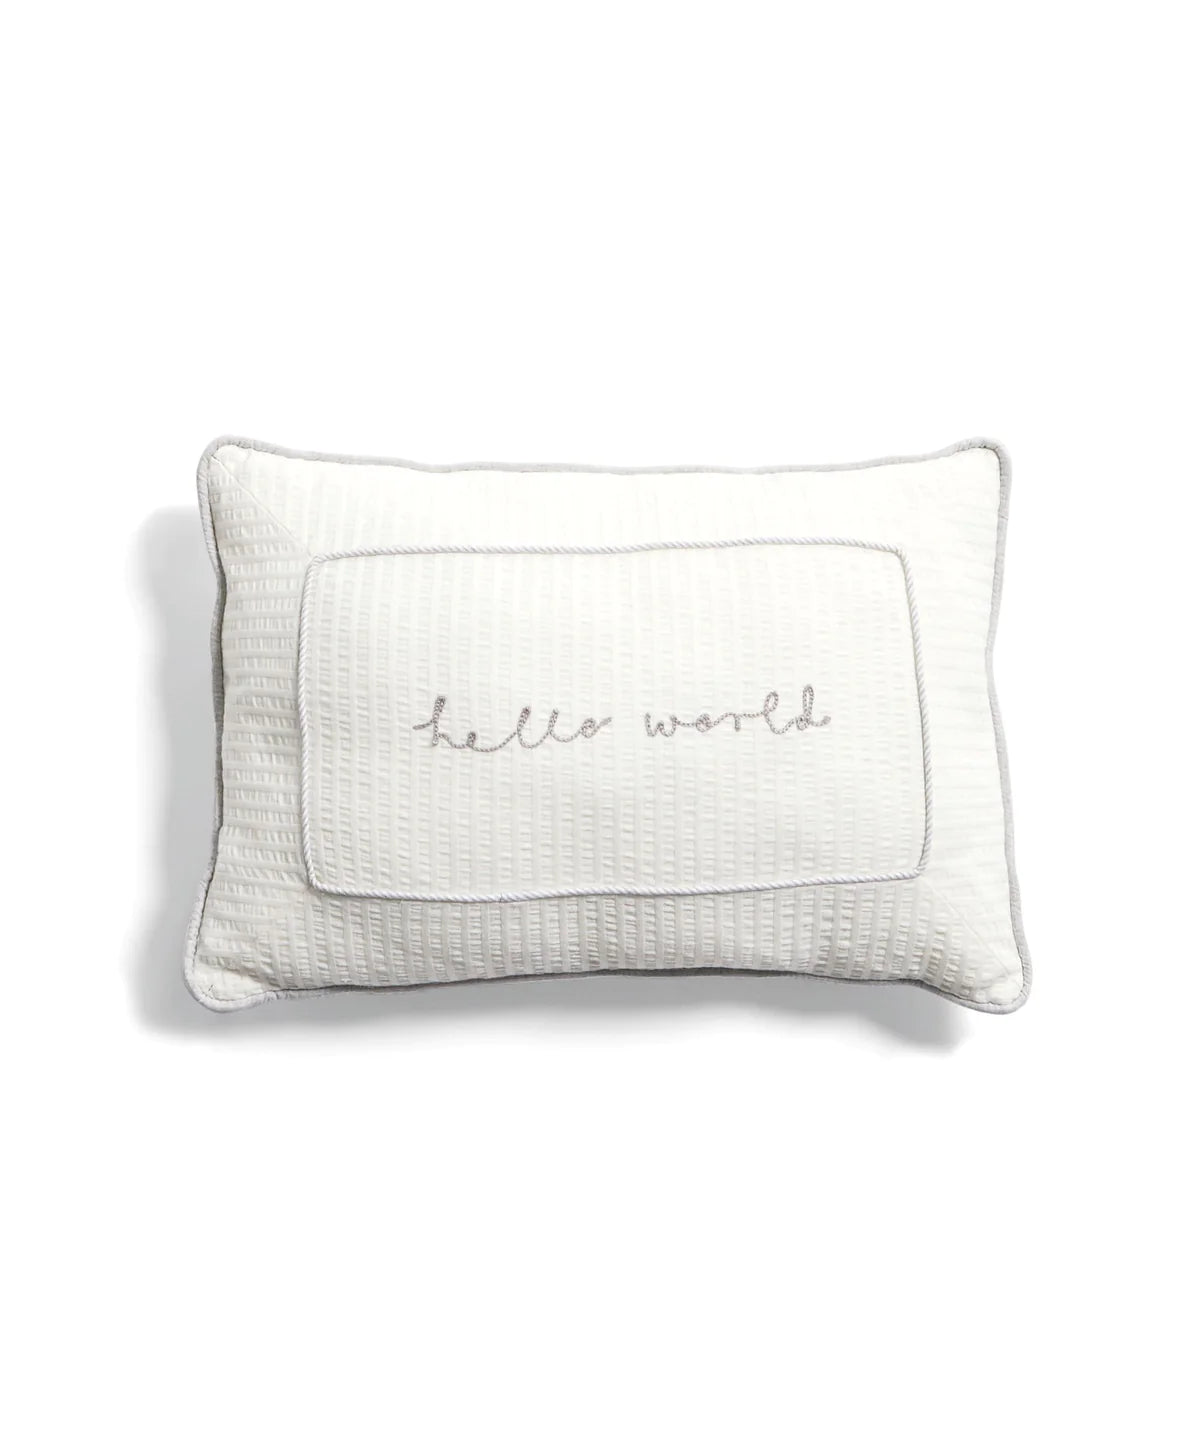 Mamas And Papas Welcome To The World Cushion White